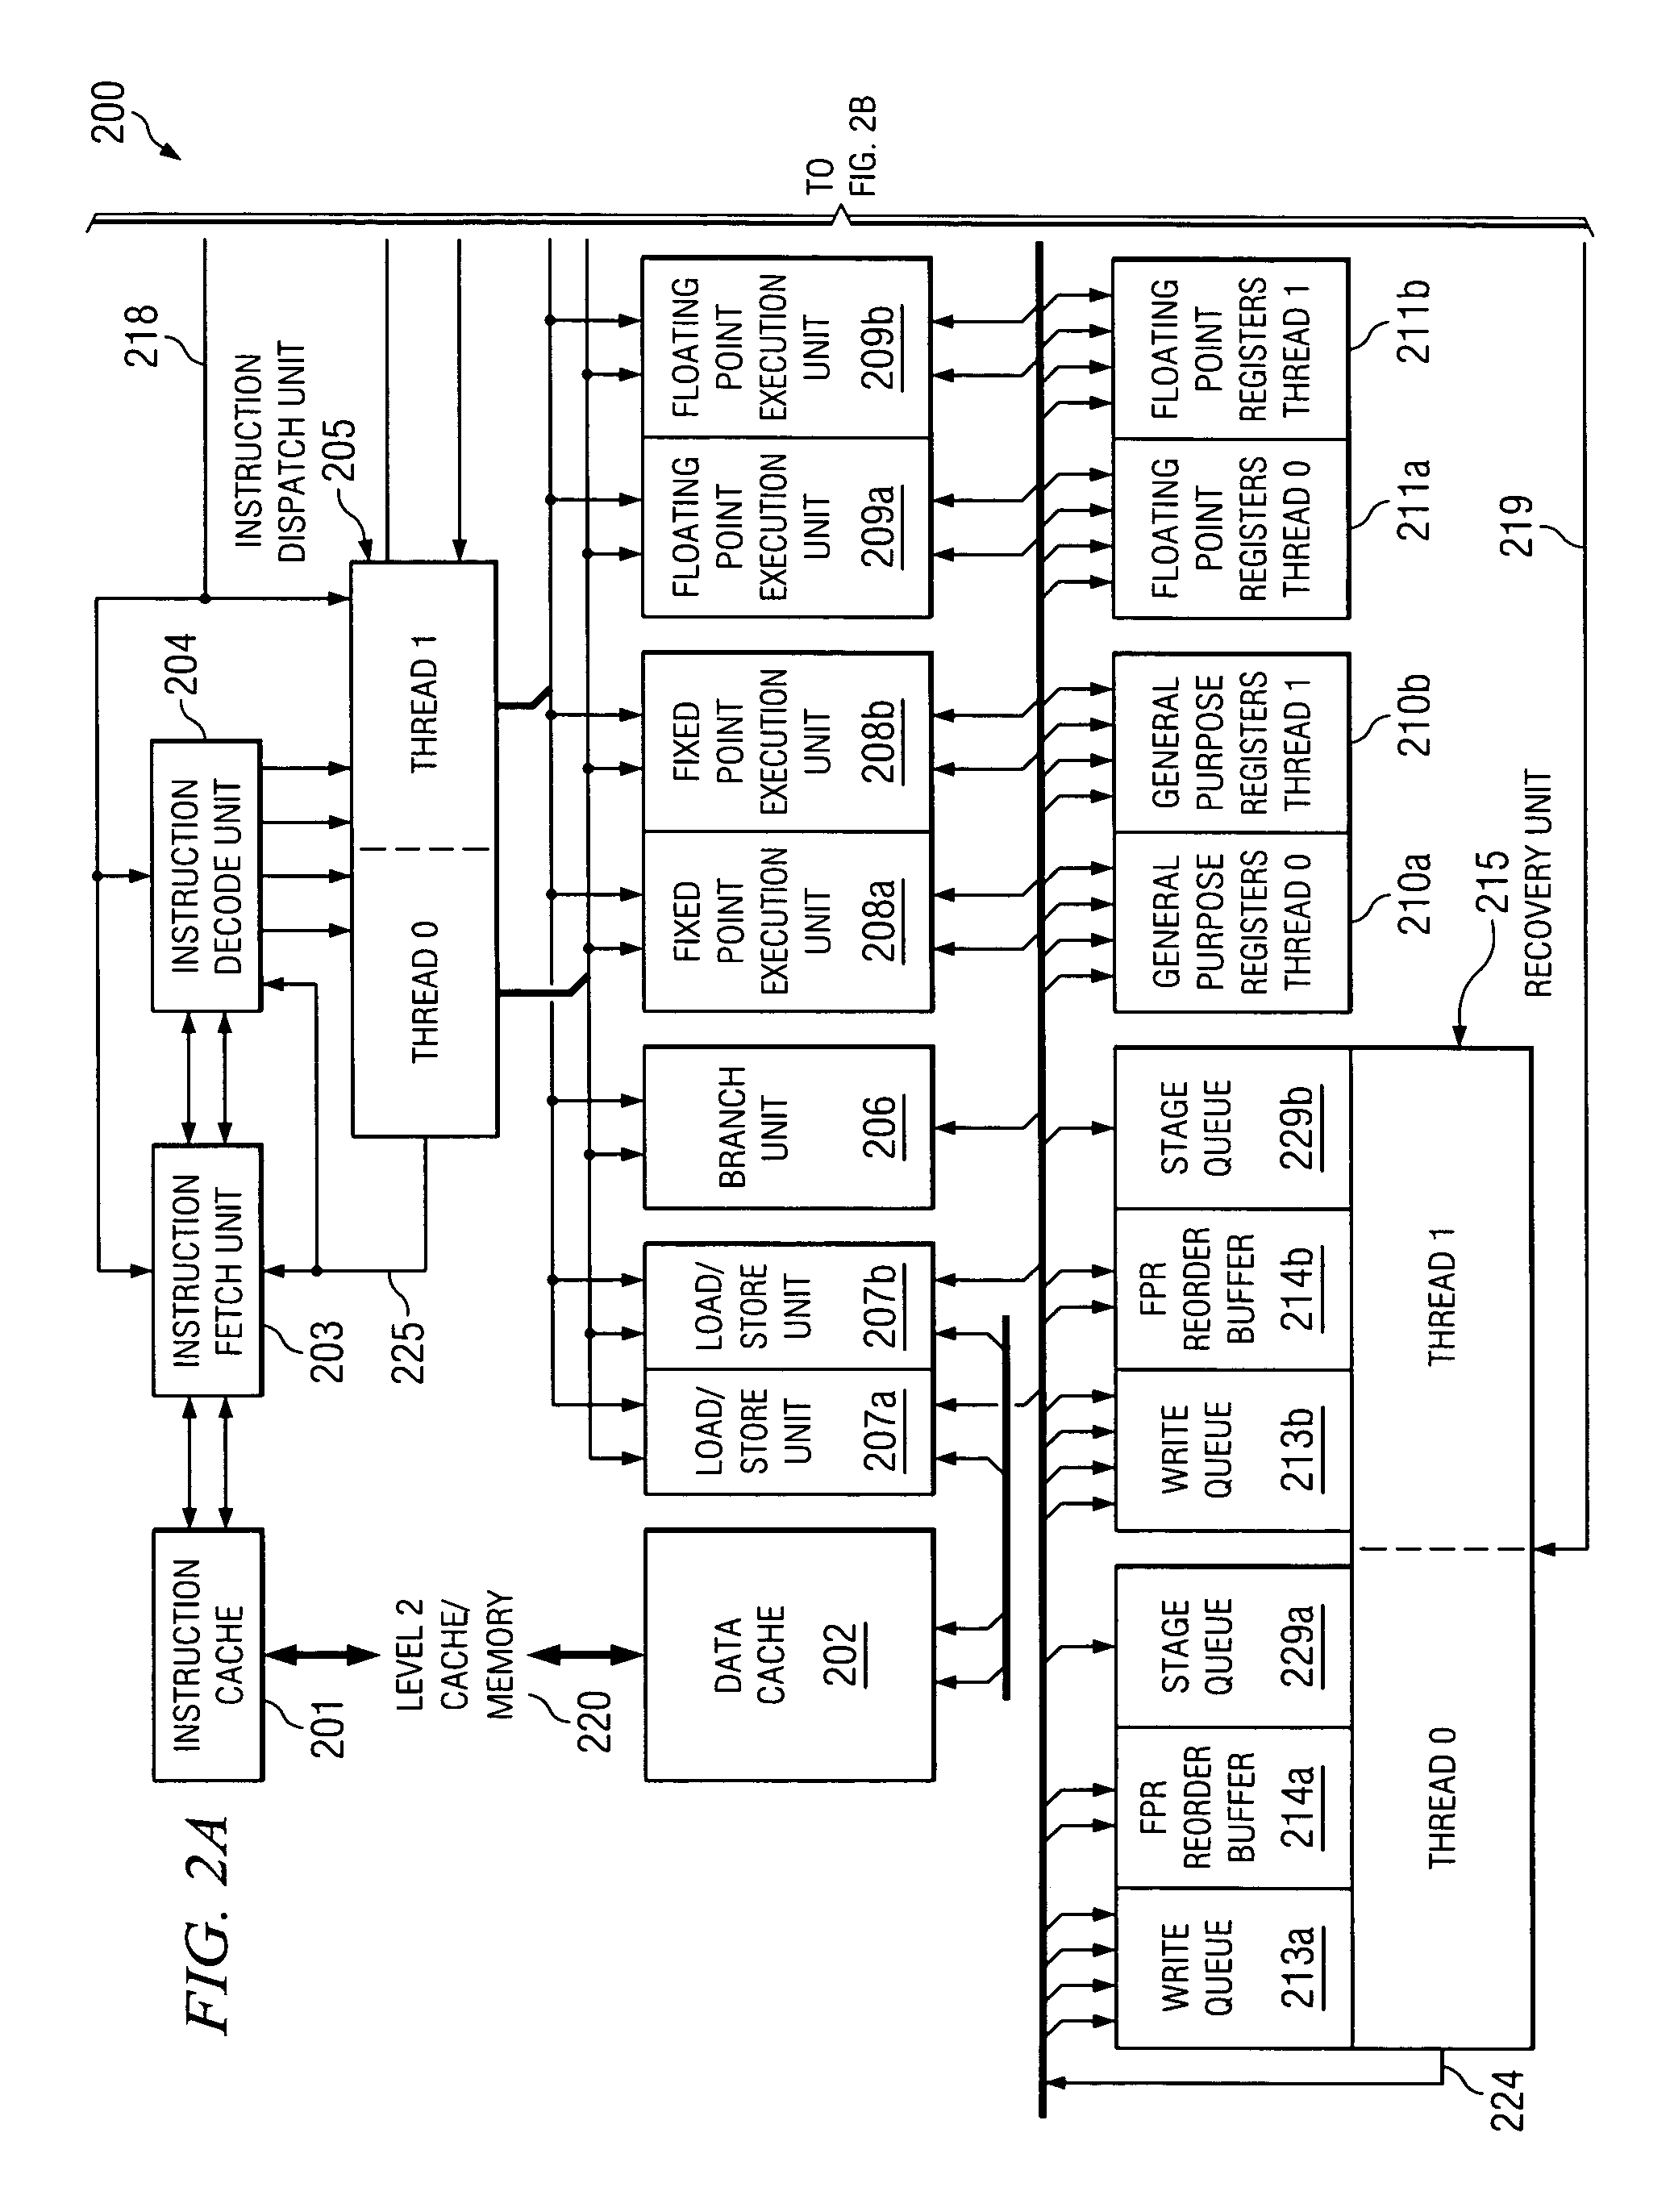 Method and apparatus for reducing number of cycles required to checkpoint instructions in a multi-threaded processor